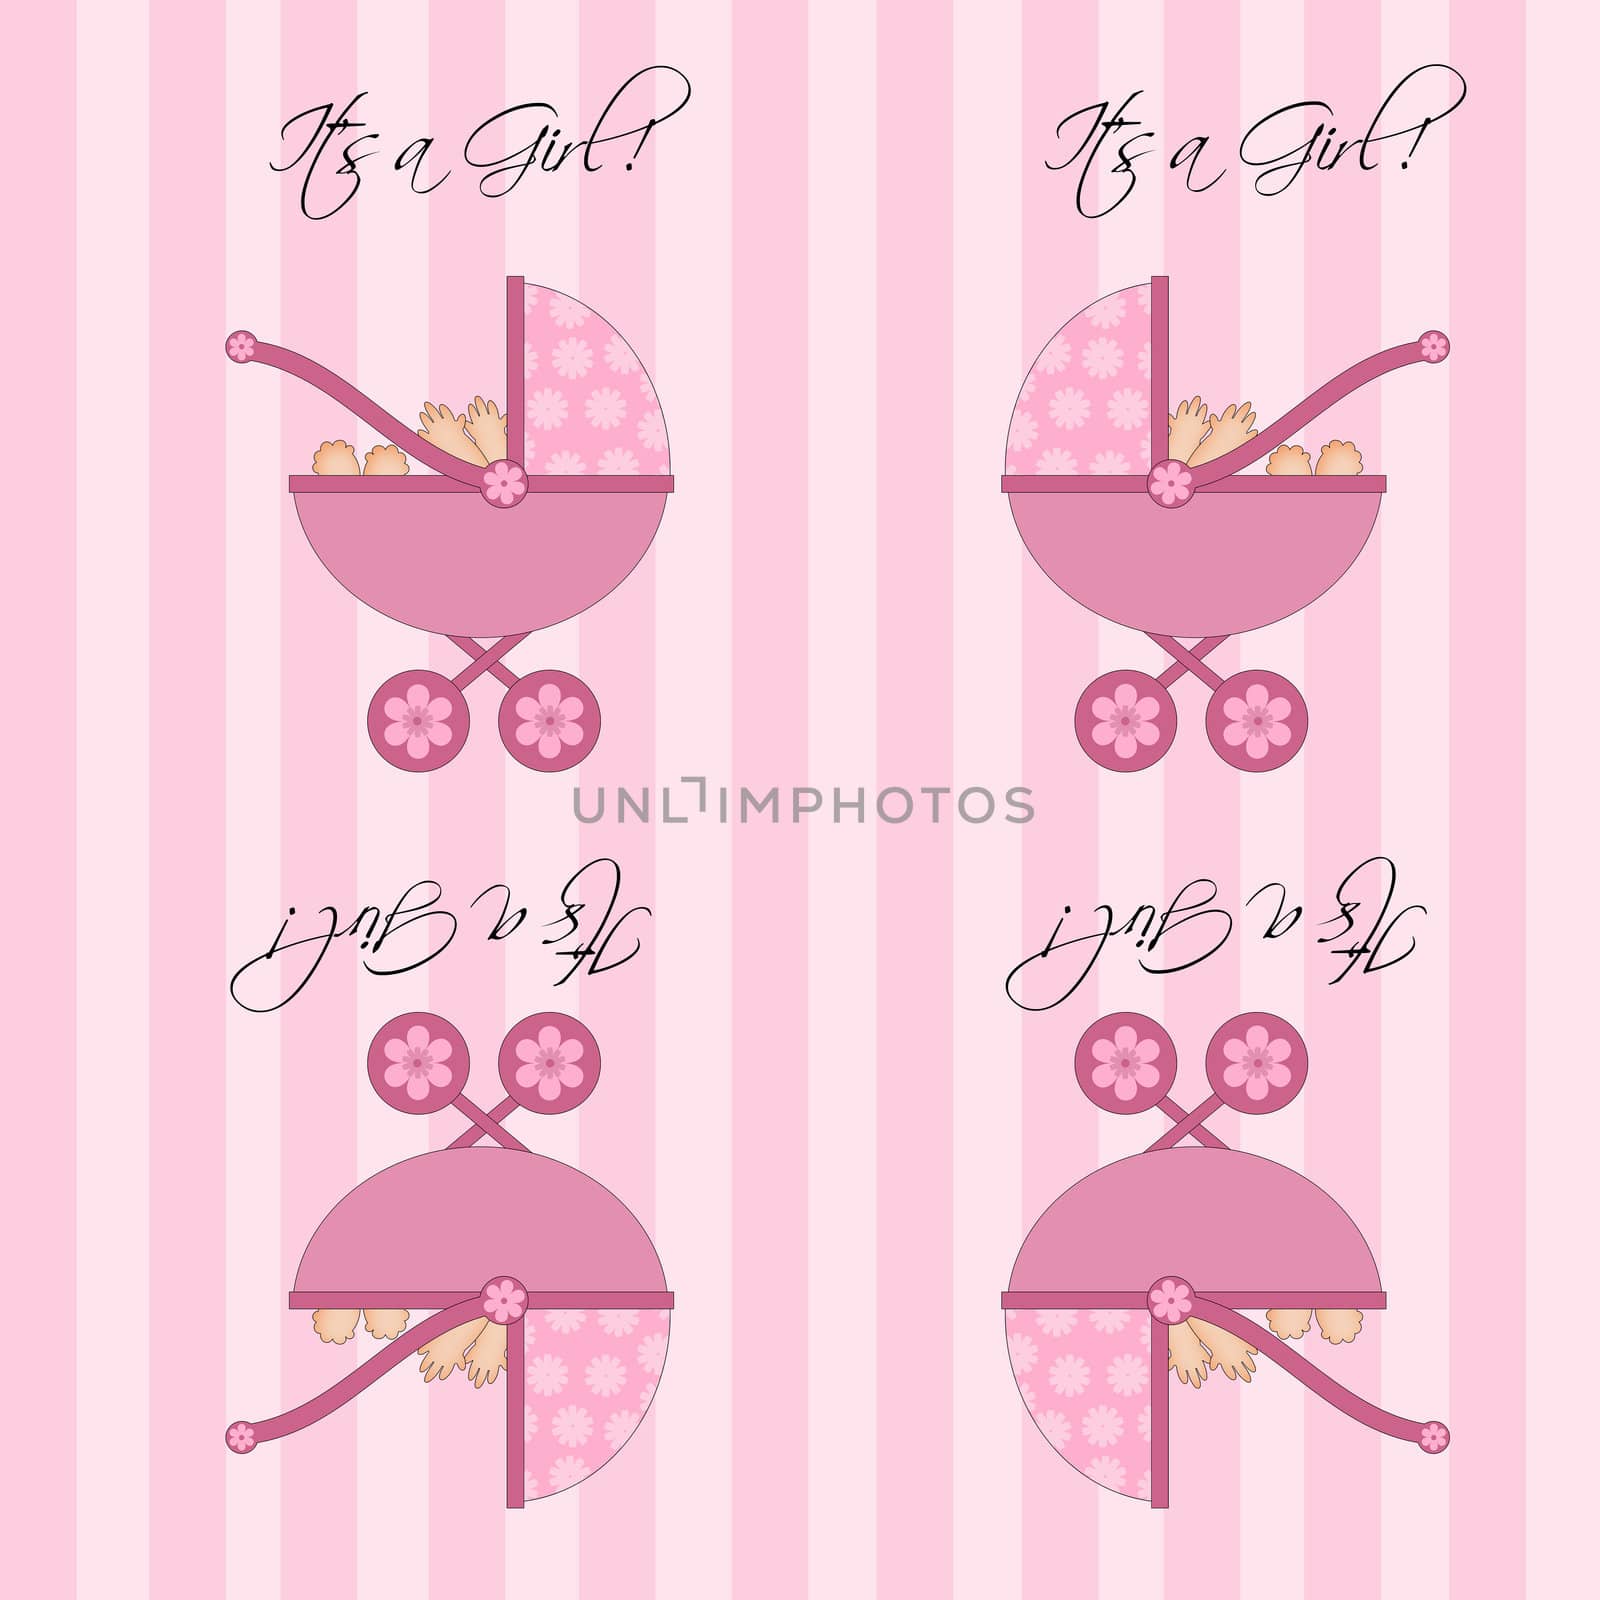 Its A Girl Pink Baby Pram Carriage Seamless Pattern Tile Background Illustration